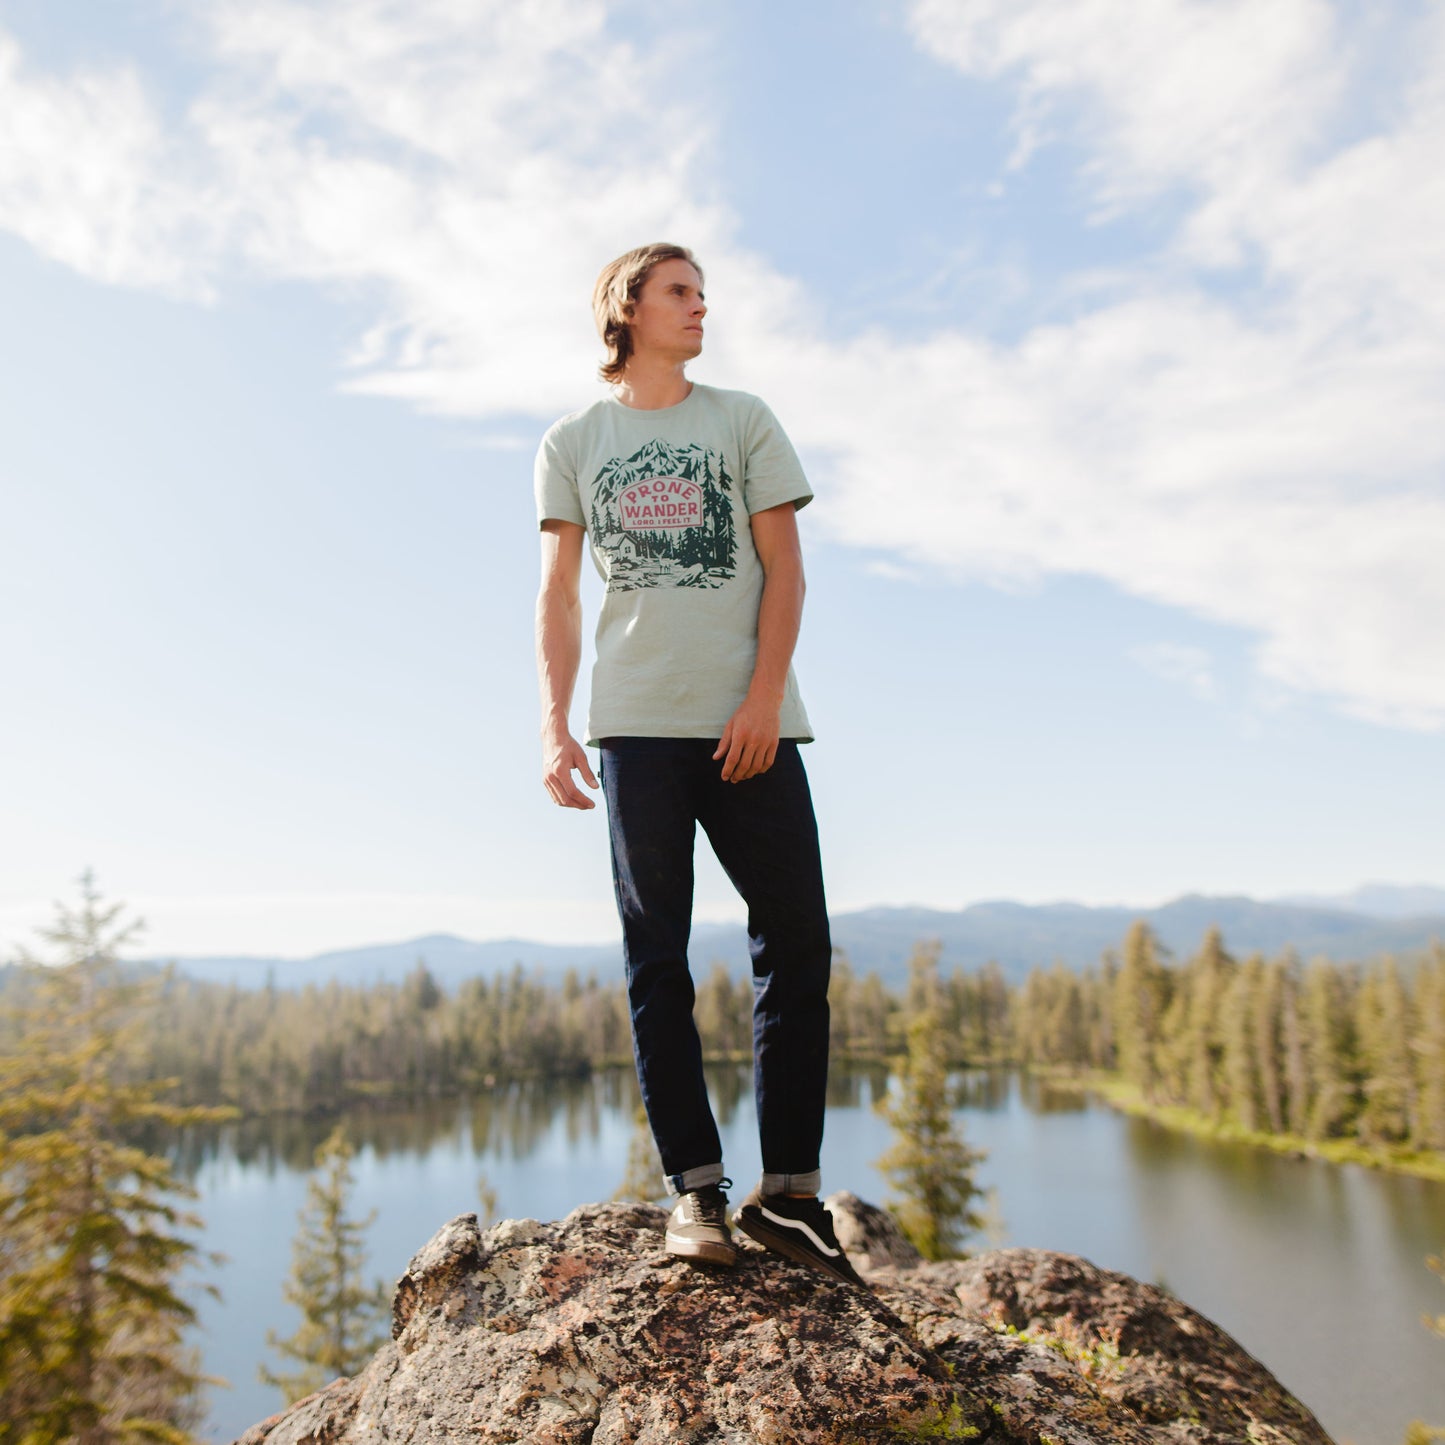 Young man wearing the Tugboat Jack Prone to Wander t-shirt while standing on a rock in the mountains with a lake in the background 